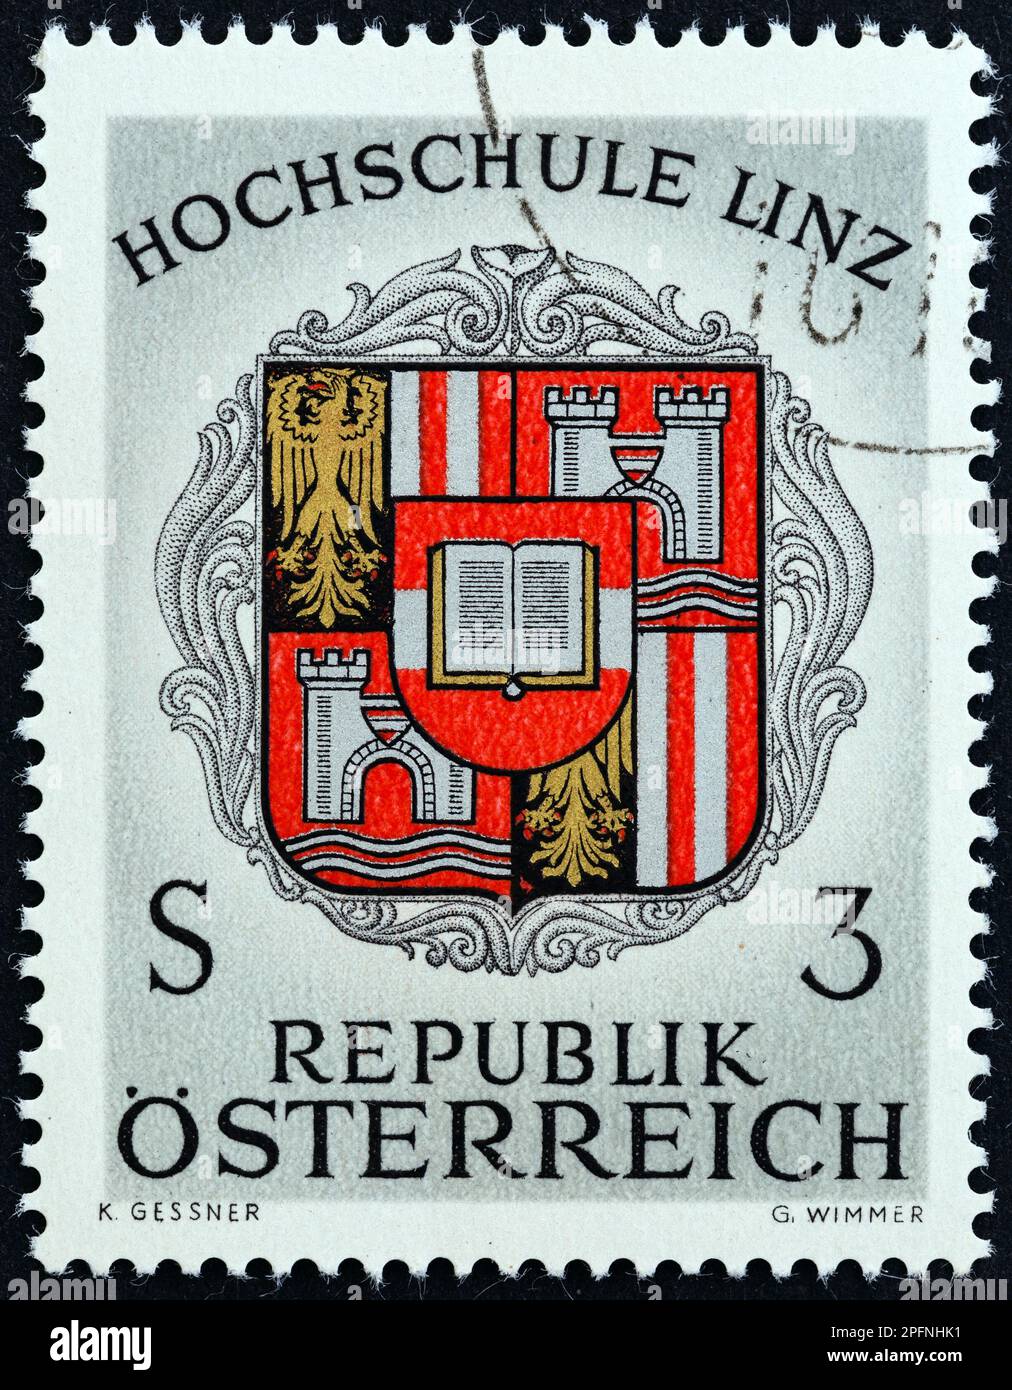 AUSTRIA - CIRCA 1966: A stamp printed in Austria issued for the Inauguration of Linz University shows Arms of Linz University, circa 1966. Stock Photo